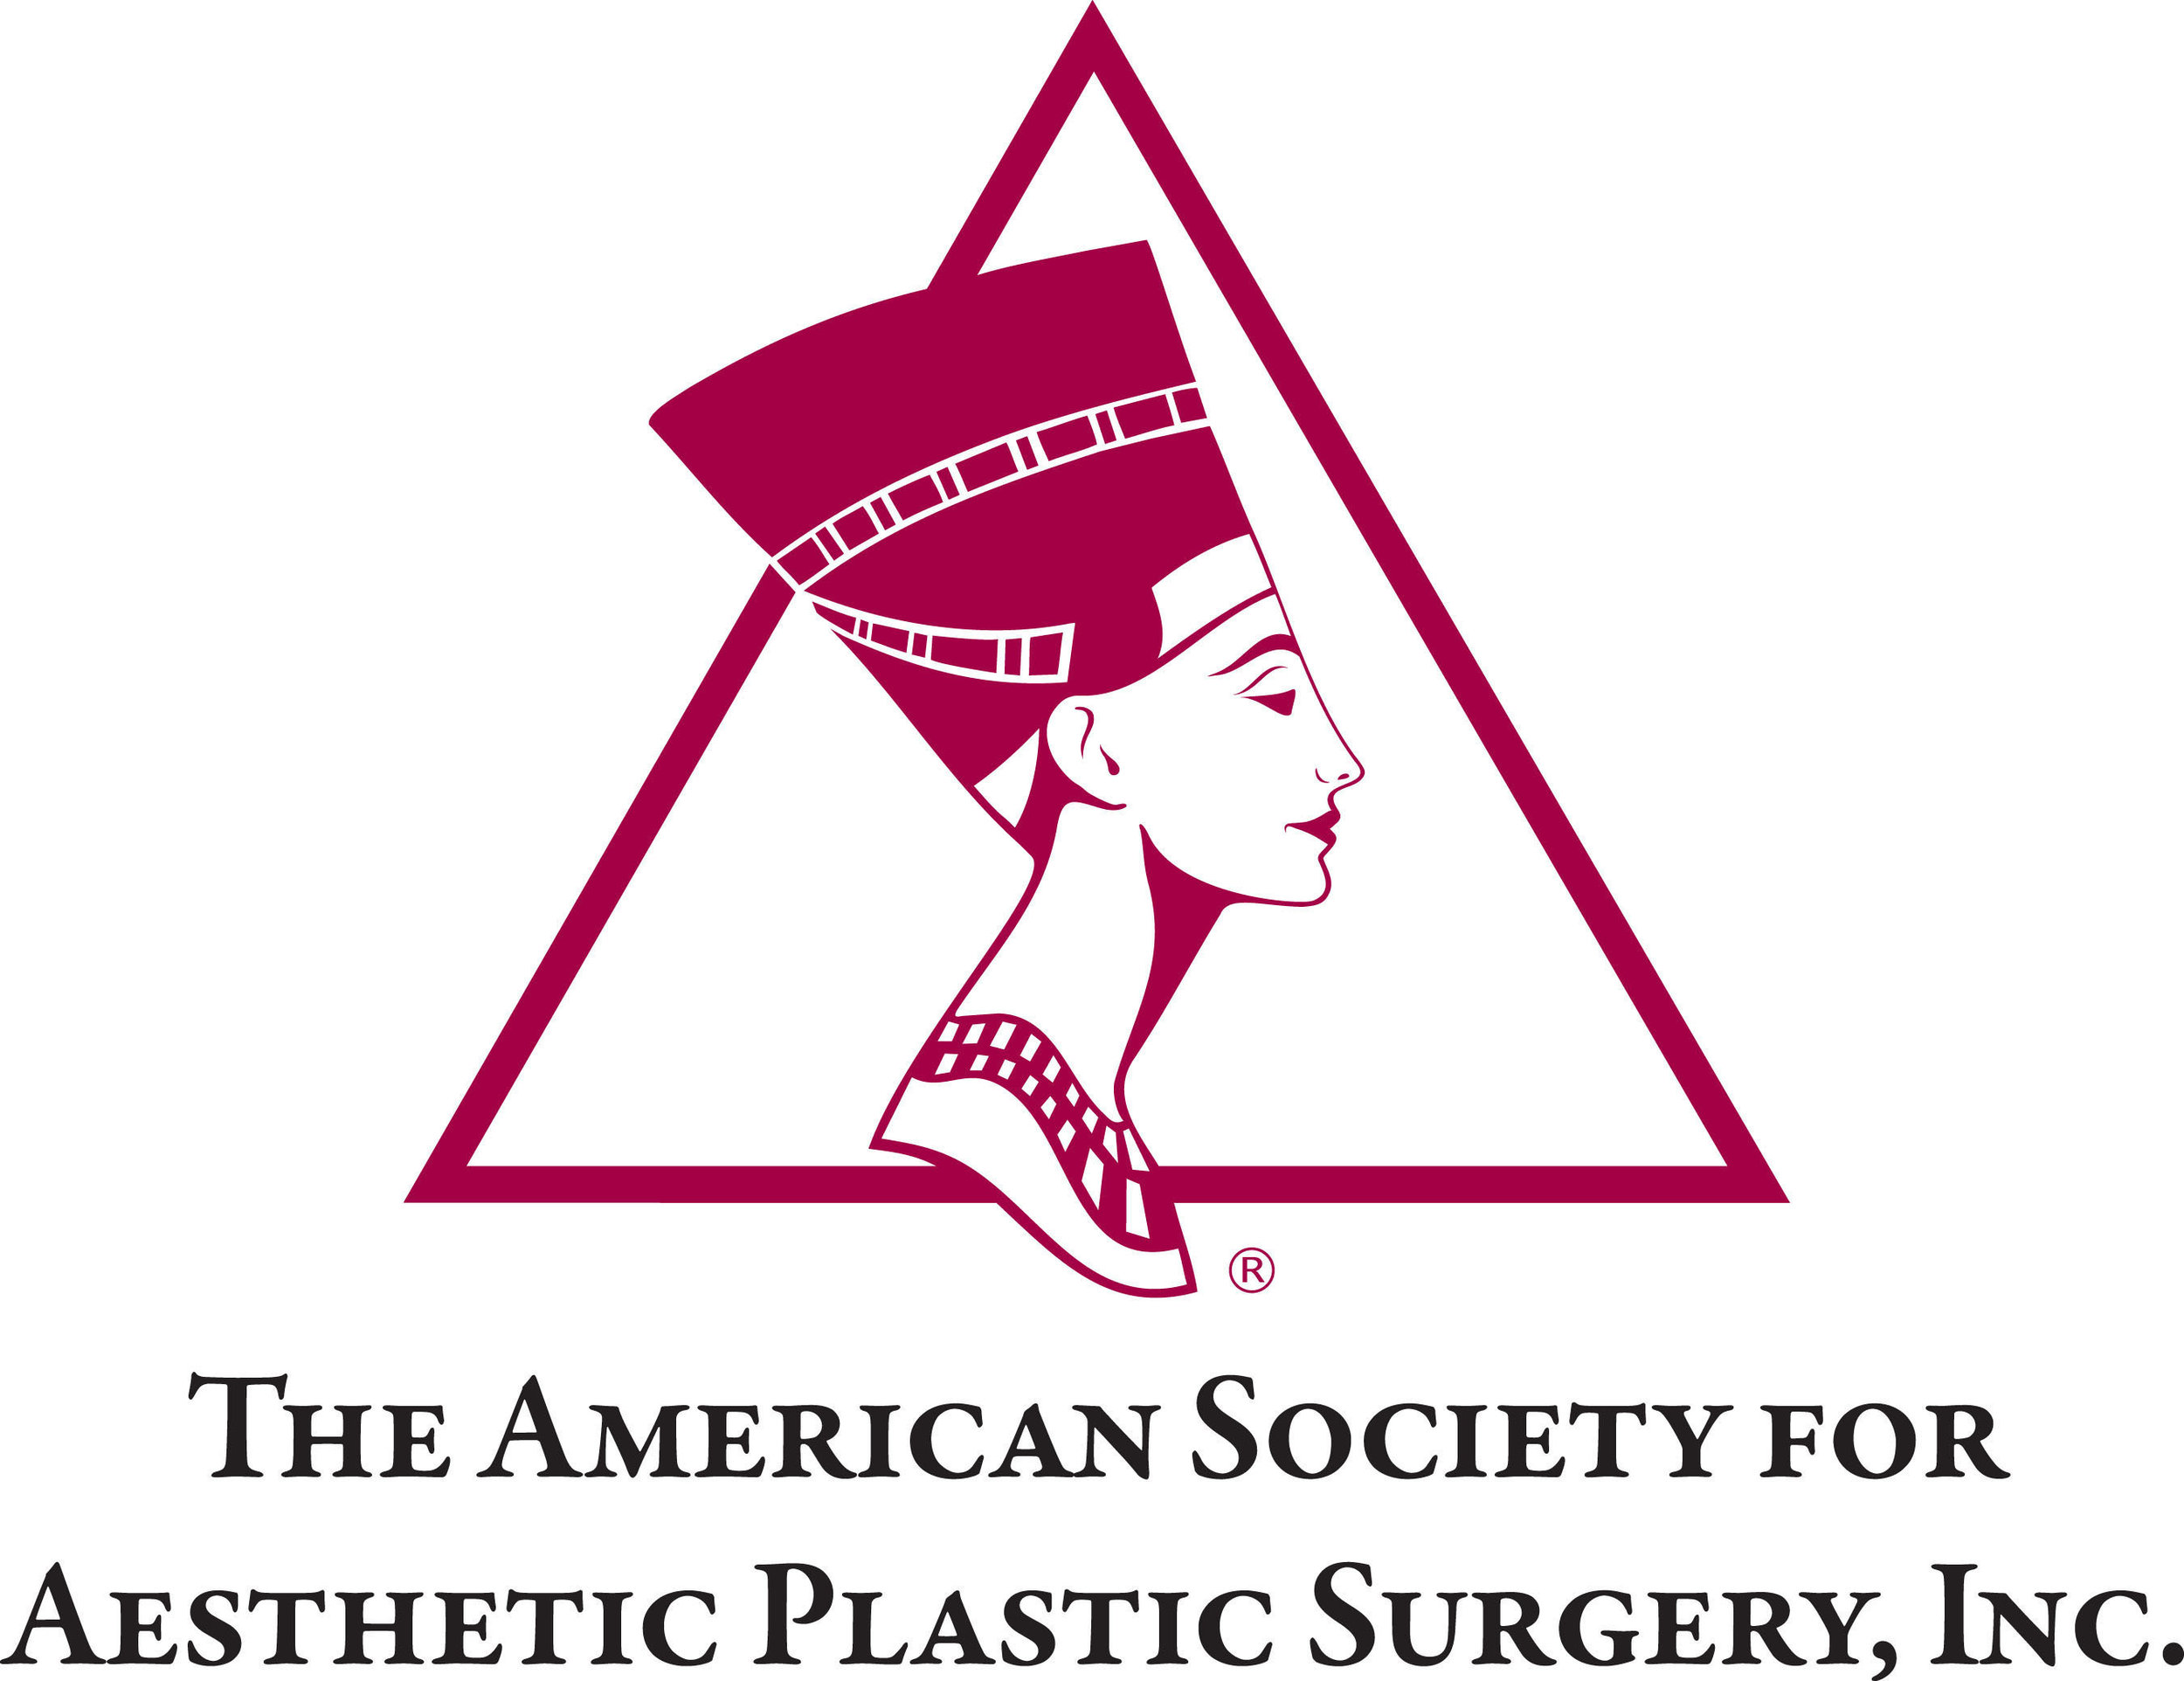 AMERICAN SOCIETY FOR AESTHETIC PLASTIC SURGERY LOGO